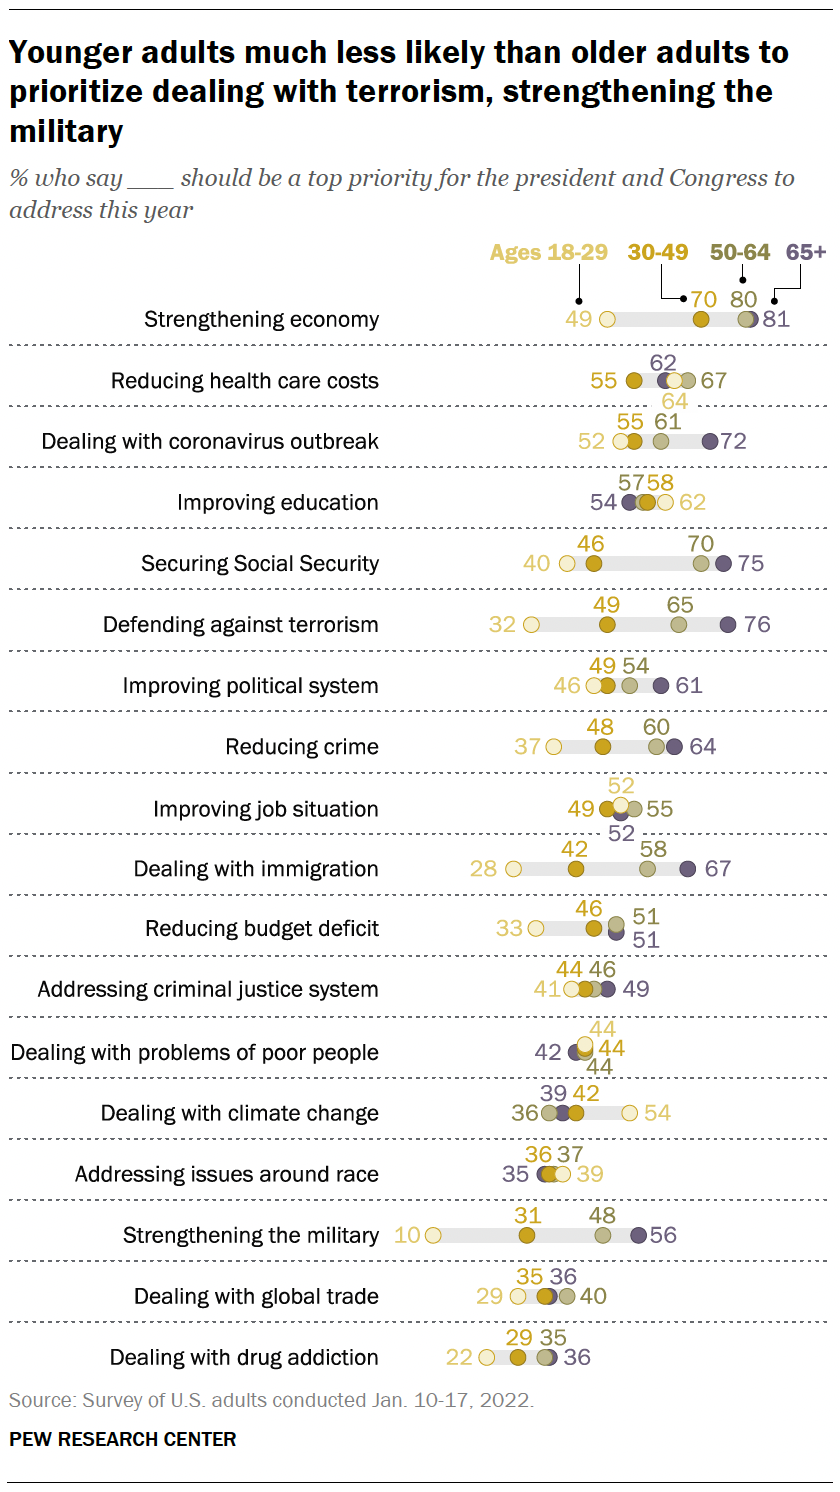 Younger adults much less likely than older adults to prioritize dealing with terrorism, strengthening the military